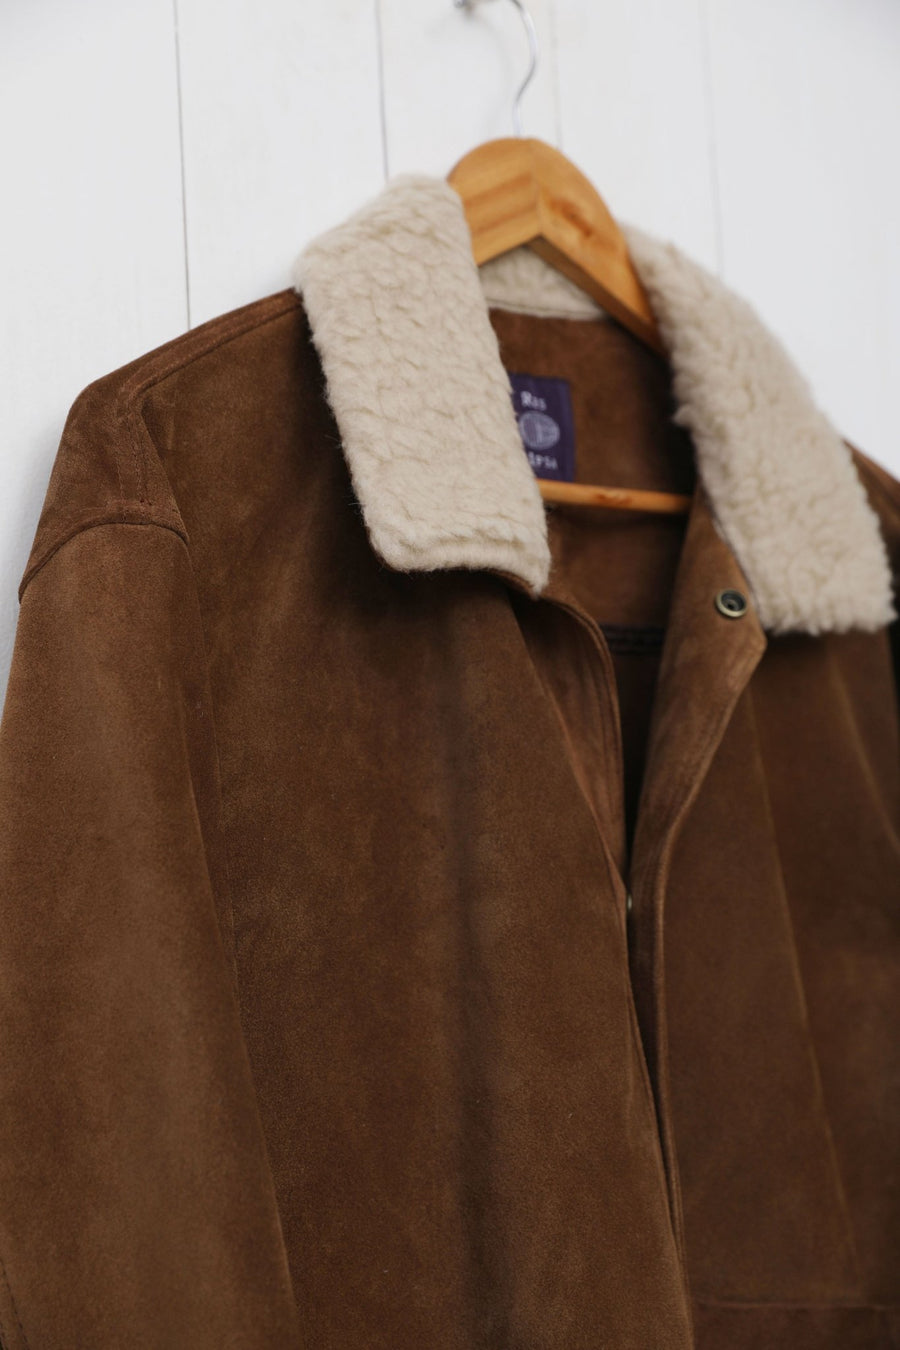 Suede Jacket With Shearling Collar #3 - RES IPSA